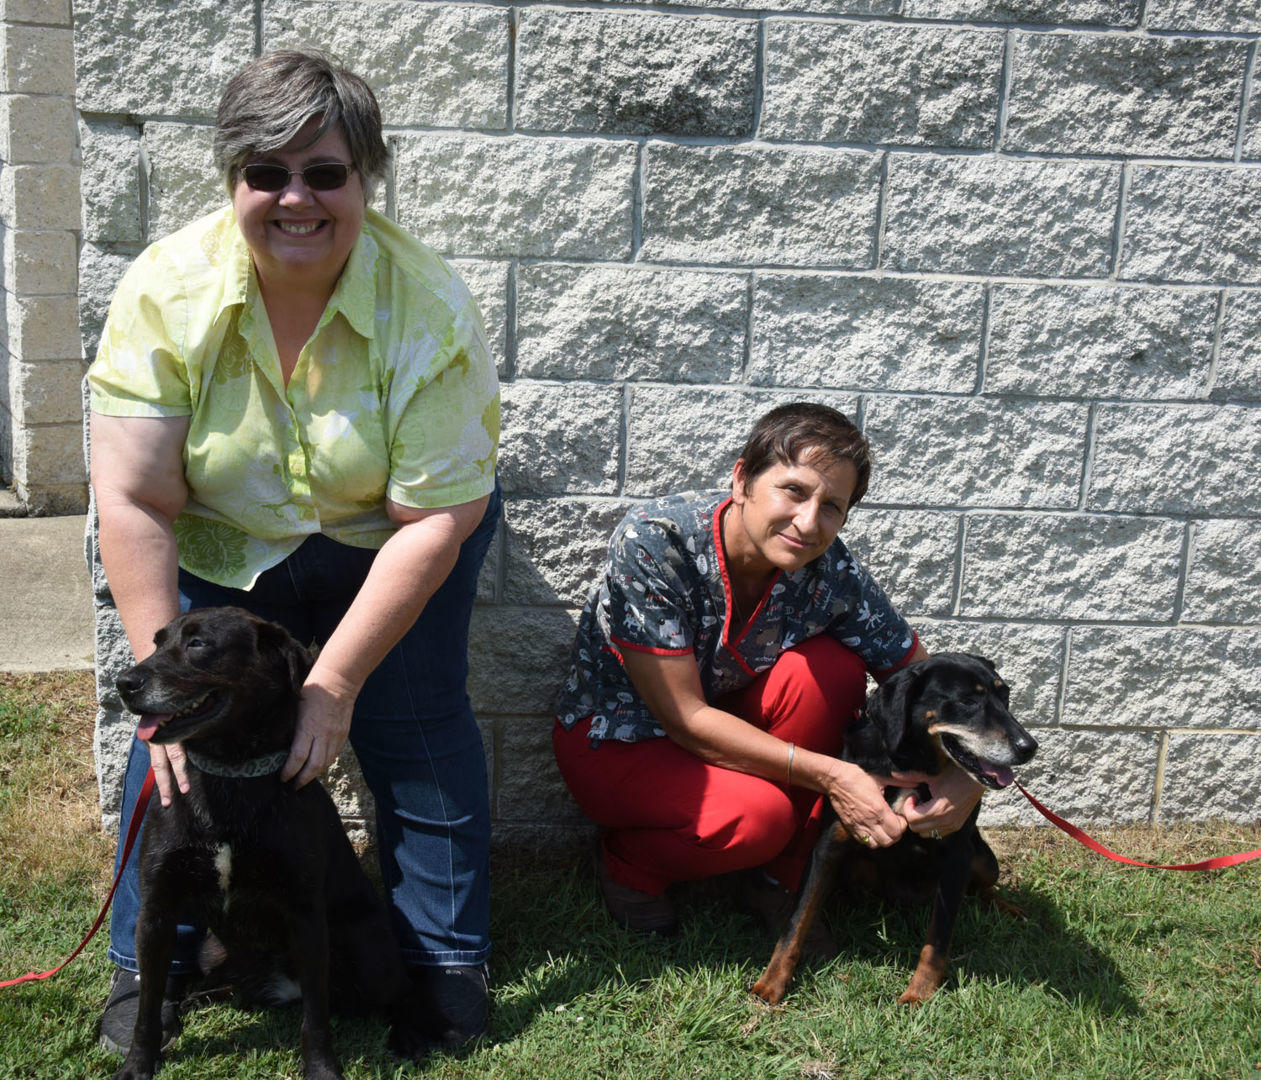 (From left) Dr. Oreta Samples, coordinator of Fort Valley State University’s Master of Public Health program and Ann Gillespie, a FVSU veterinary technician, pose with two dogs from FVSU’s kennel.